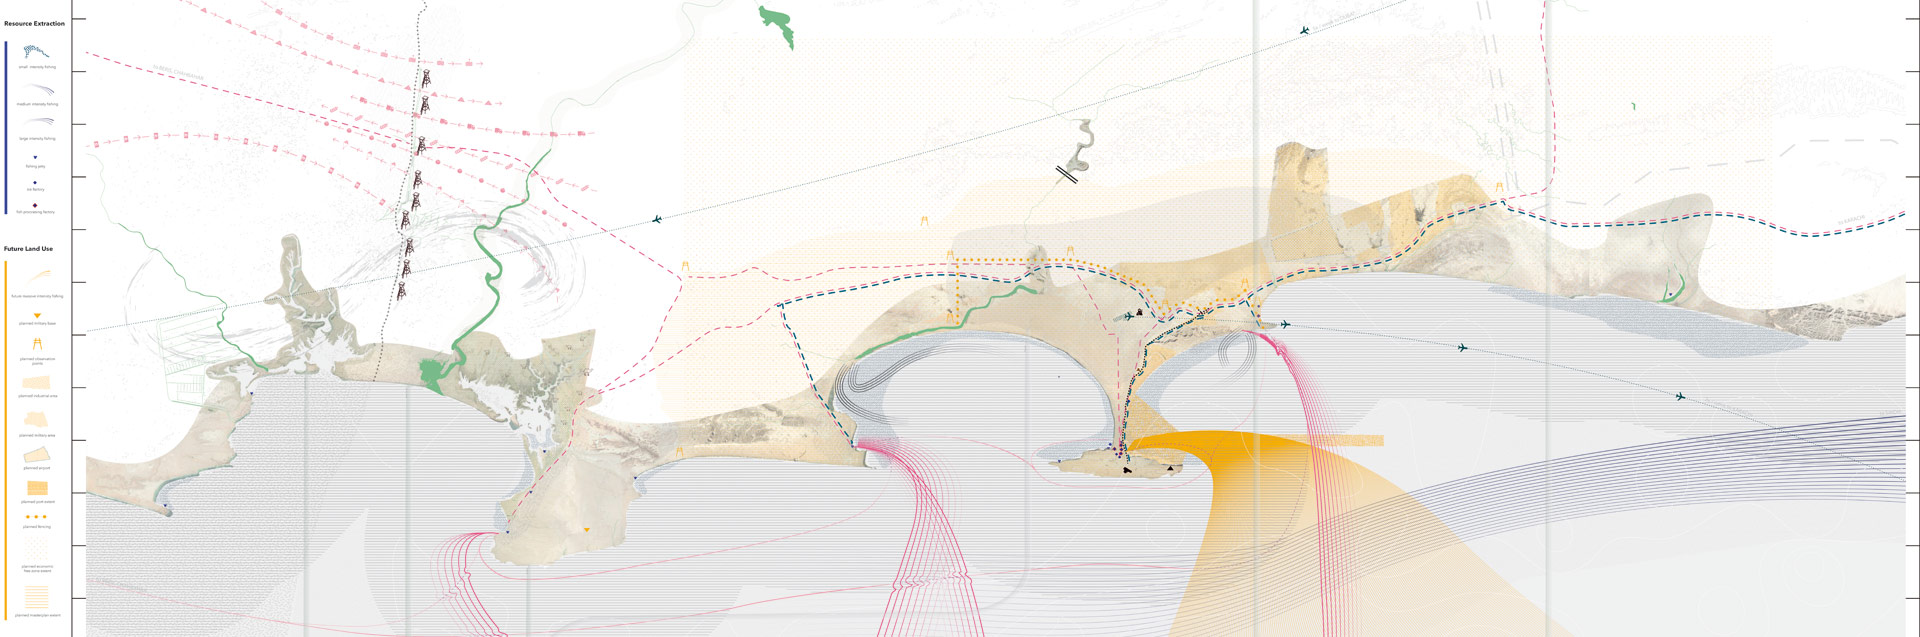 An extract from a map showing the coastal area of the Gwadar region, including the border with Iran. Lines and shading show the exchange of goods, movement of people and the extraction resources, as well as land and marine ecologies. 